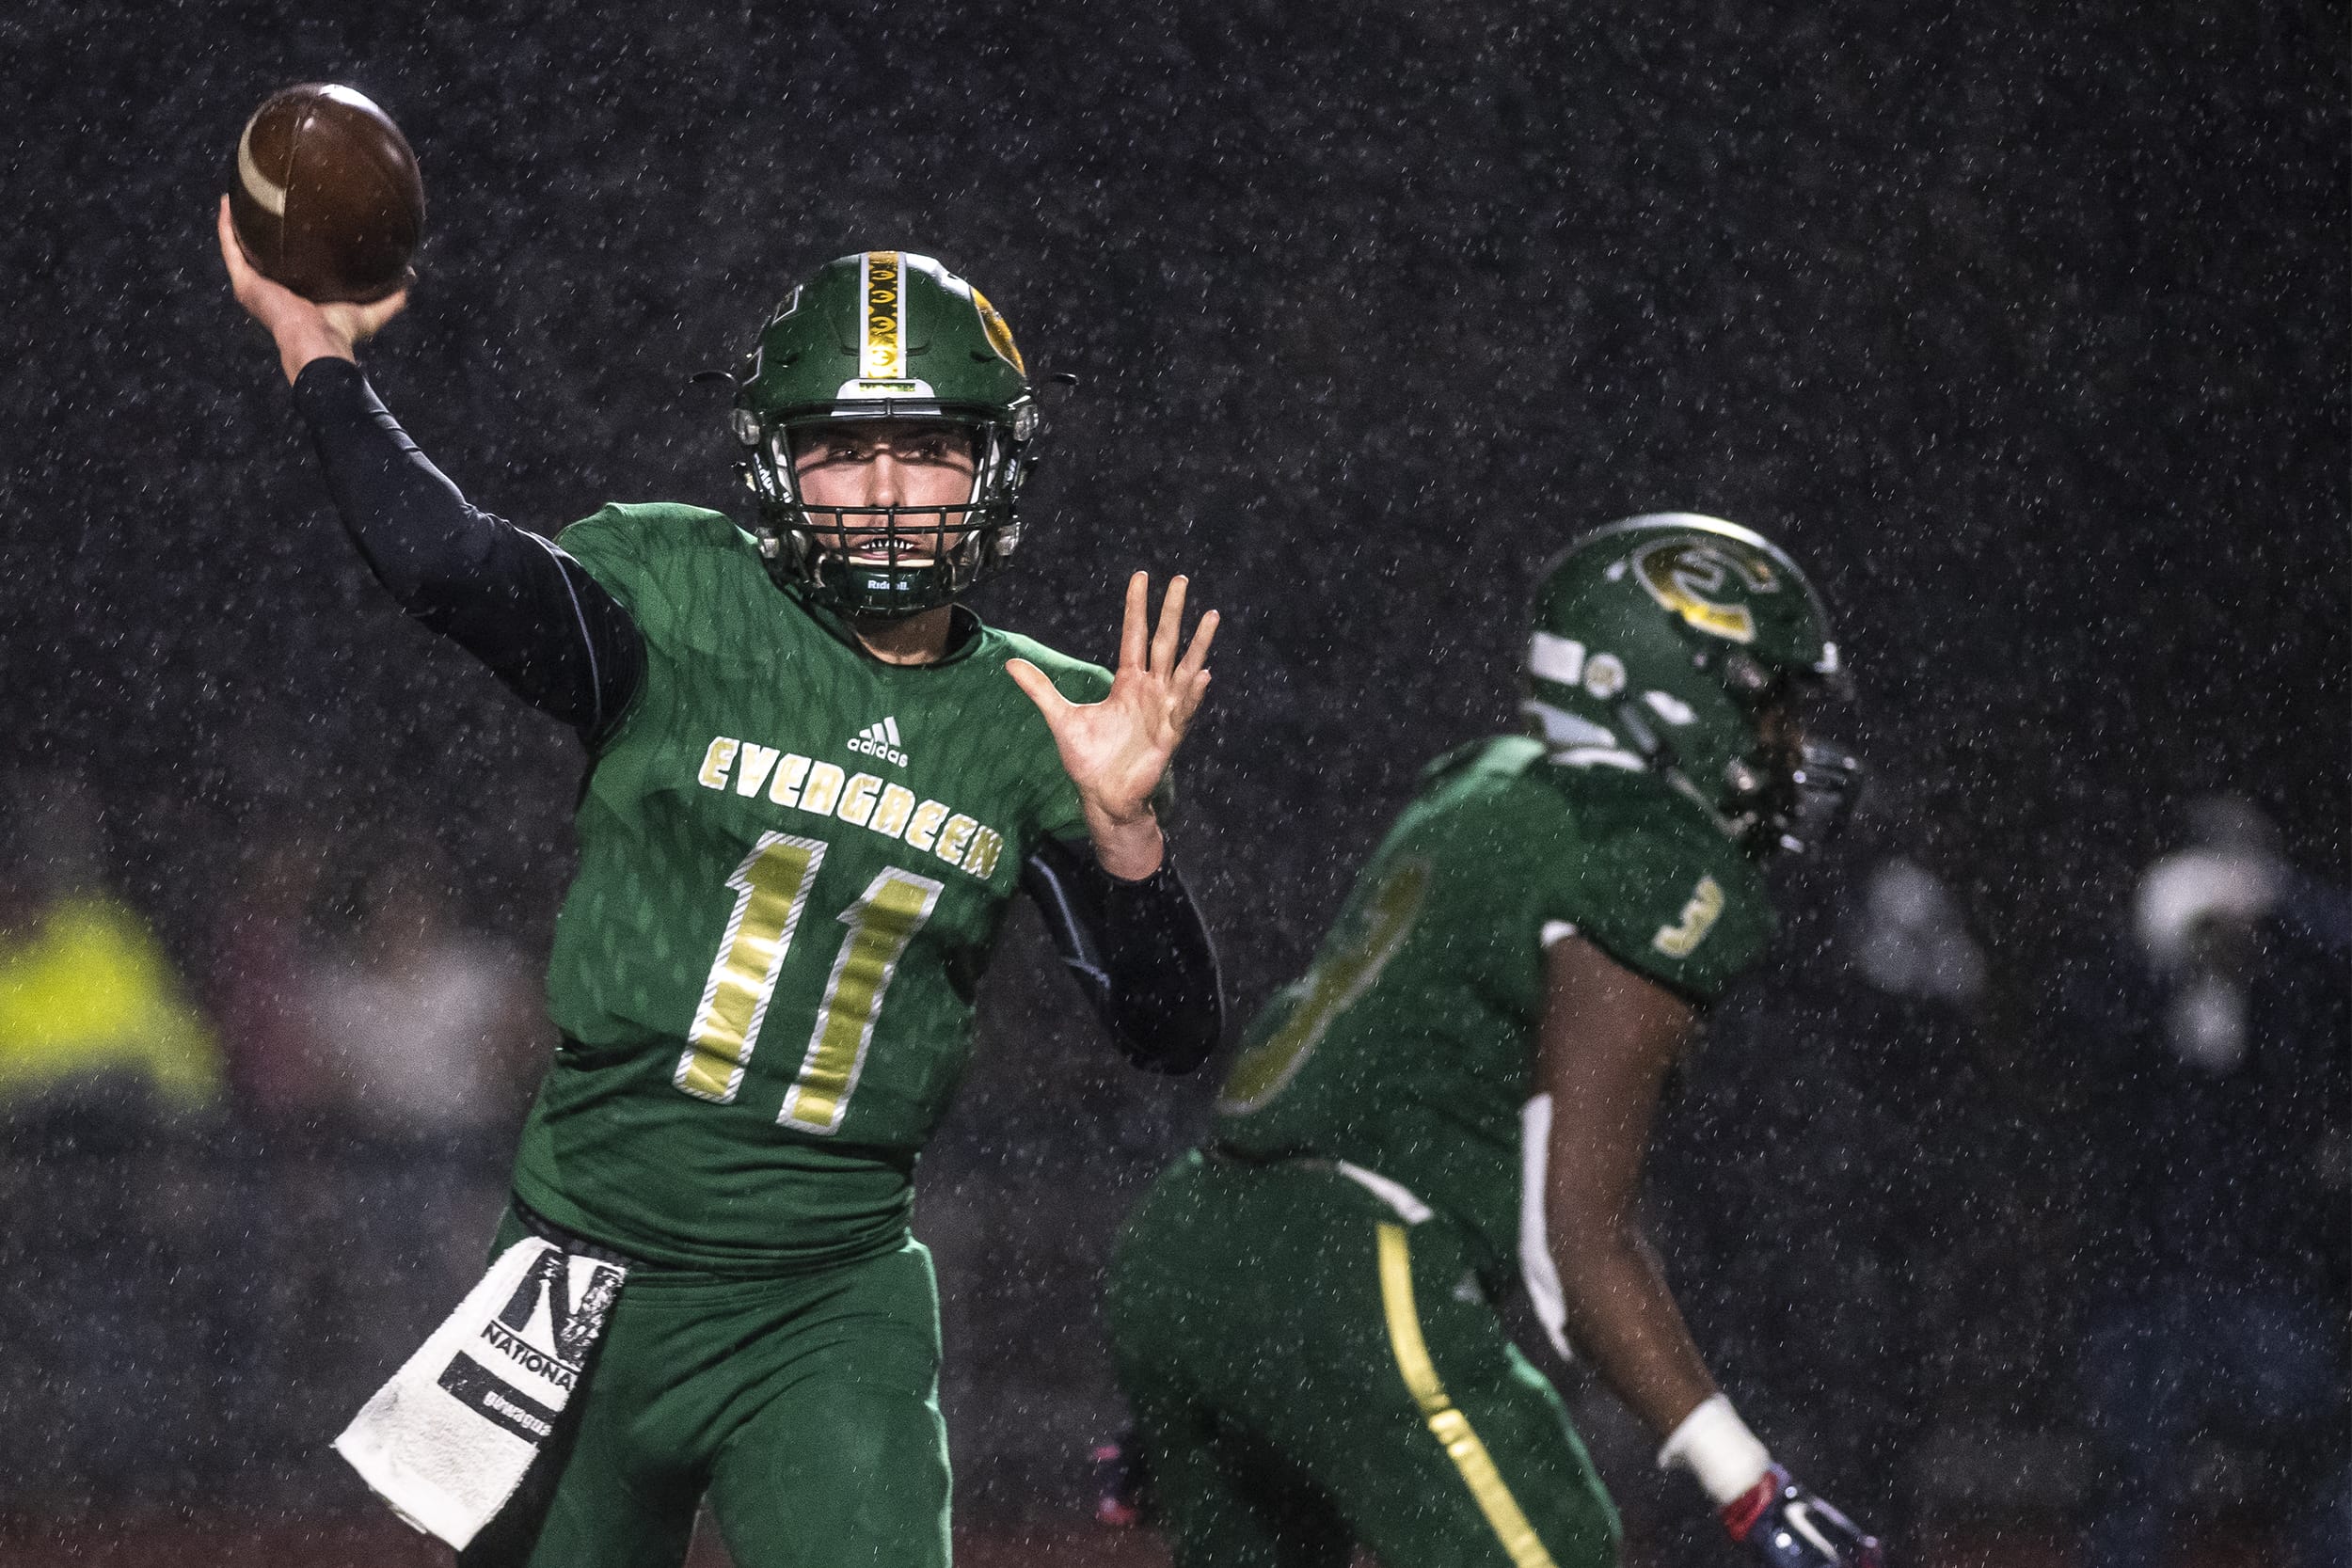 Evergreen’s Carter Monda throws the ball against Mountain View during a game at McKenzie Stadium on Friday night, Oct. 18, 2019.